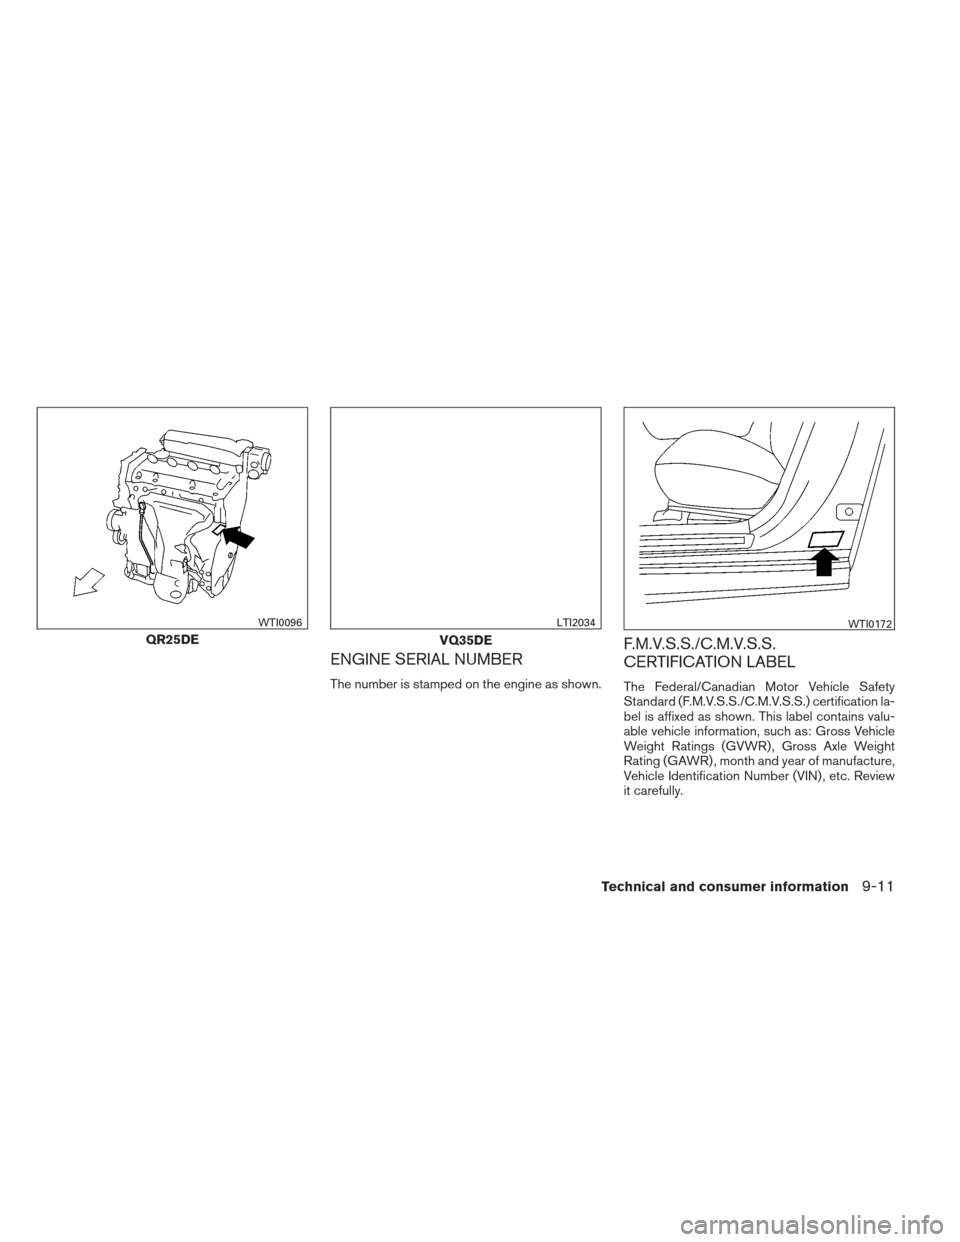 NISSAN ALTIMA 2013 L33 / 5.G Owners Manual ENGINE SERIAL NUMBER
The number is stamped on the engine as shown.
F.M.V.S.S./C.M.V.S.S.
CERTIFICATION LABEL
The Federal/Canadian Motor Vehicle Safety
Standard (F.M.V.S.S./C.M.V.S.S.) certification la